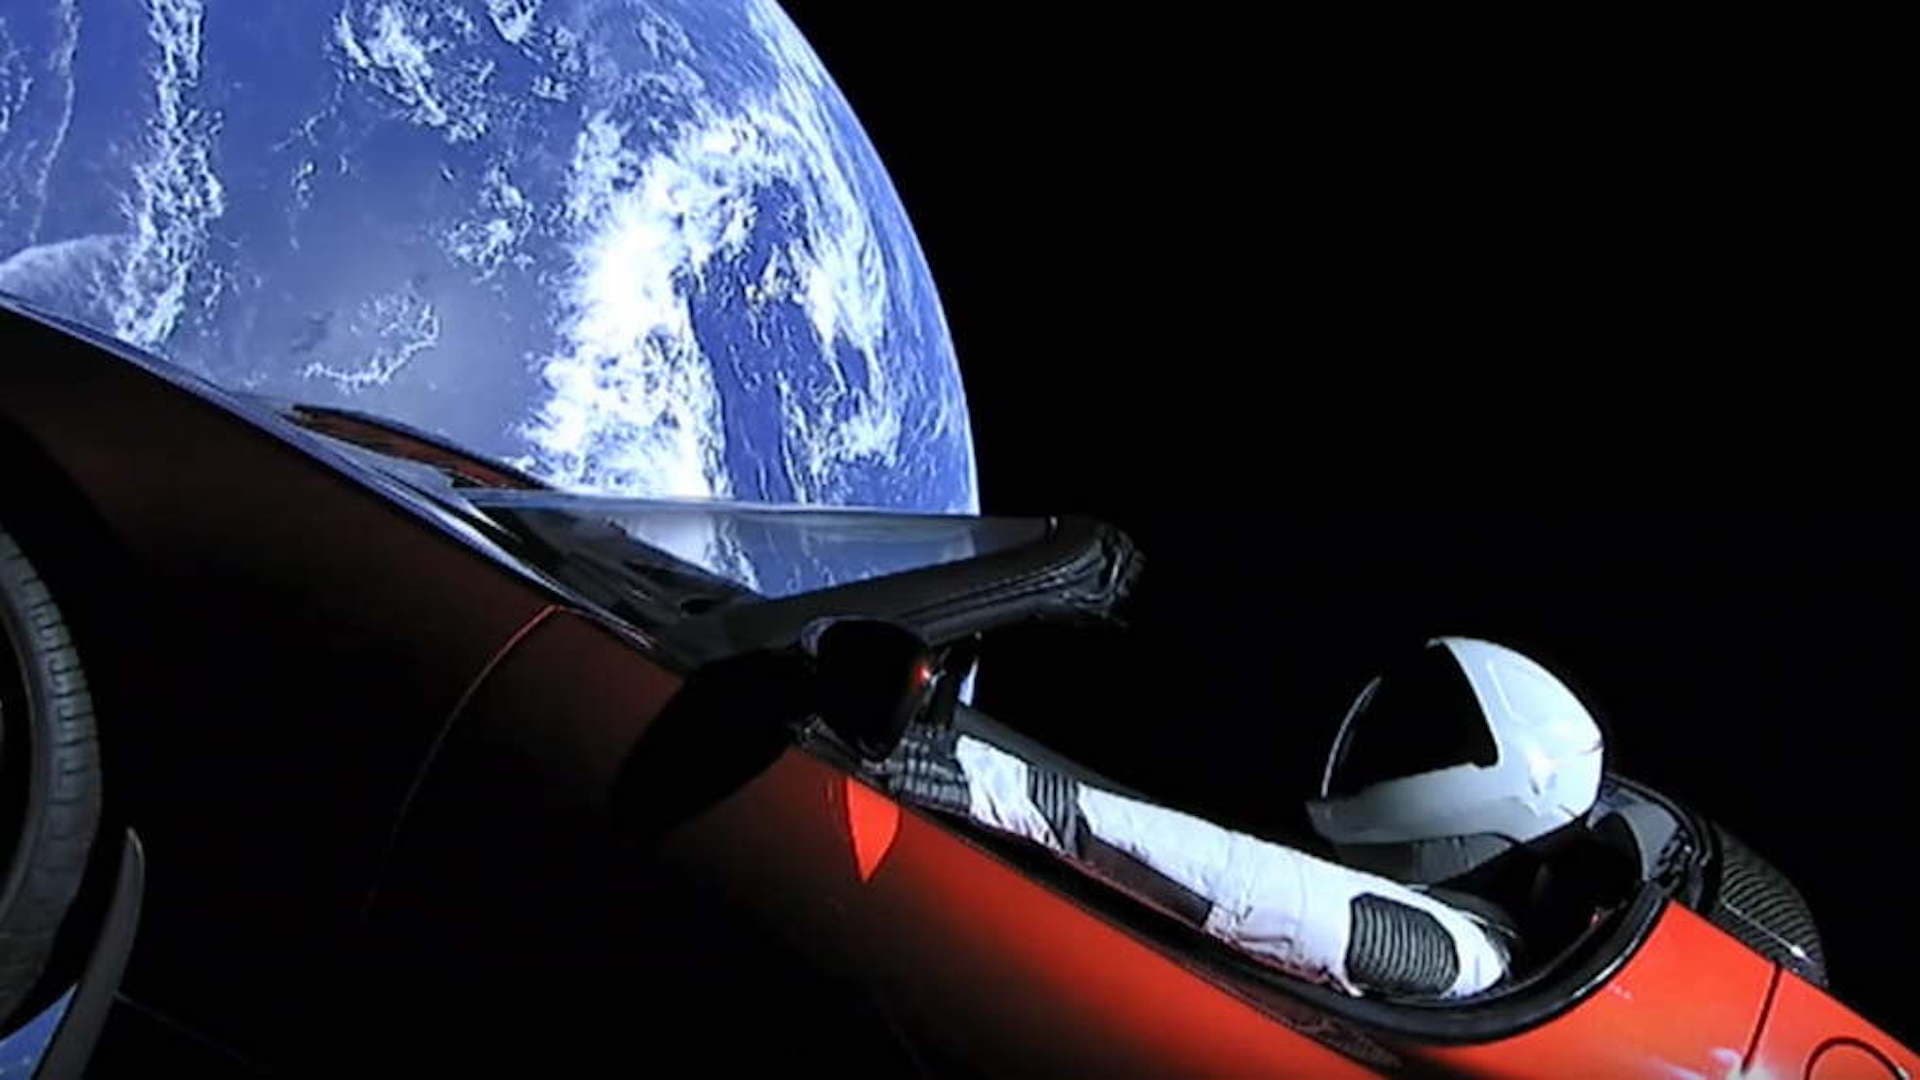 SpaceX’s Tesla Roadster and Starman Have Now Ventured Beyond Mars